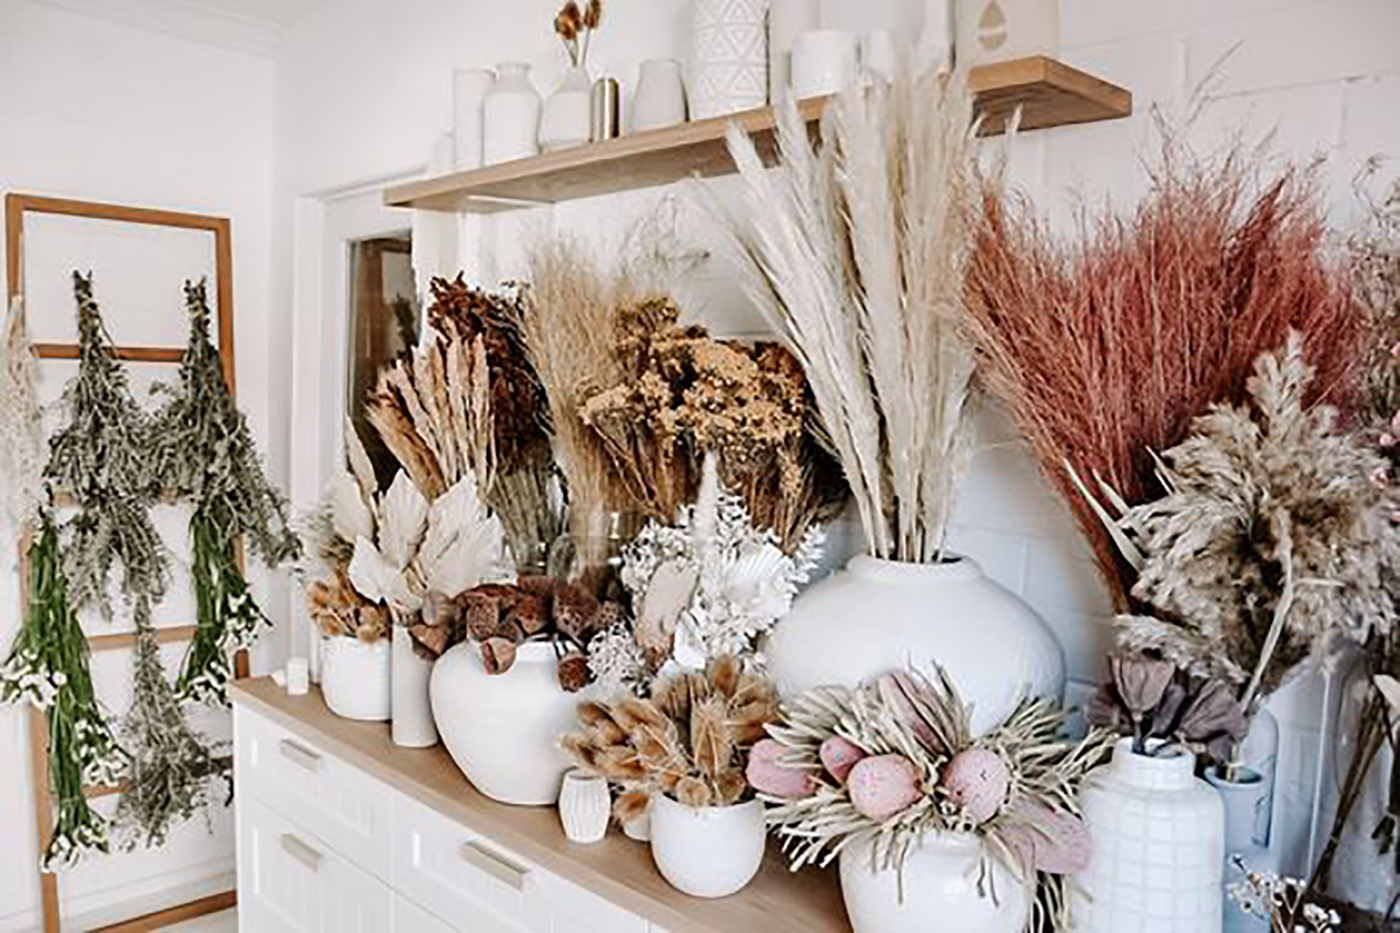 Decorate your space with dried flowers.